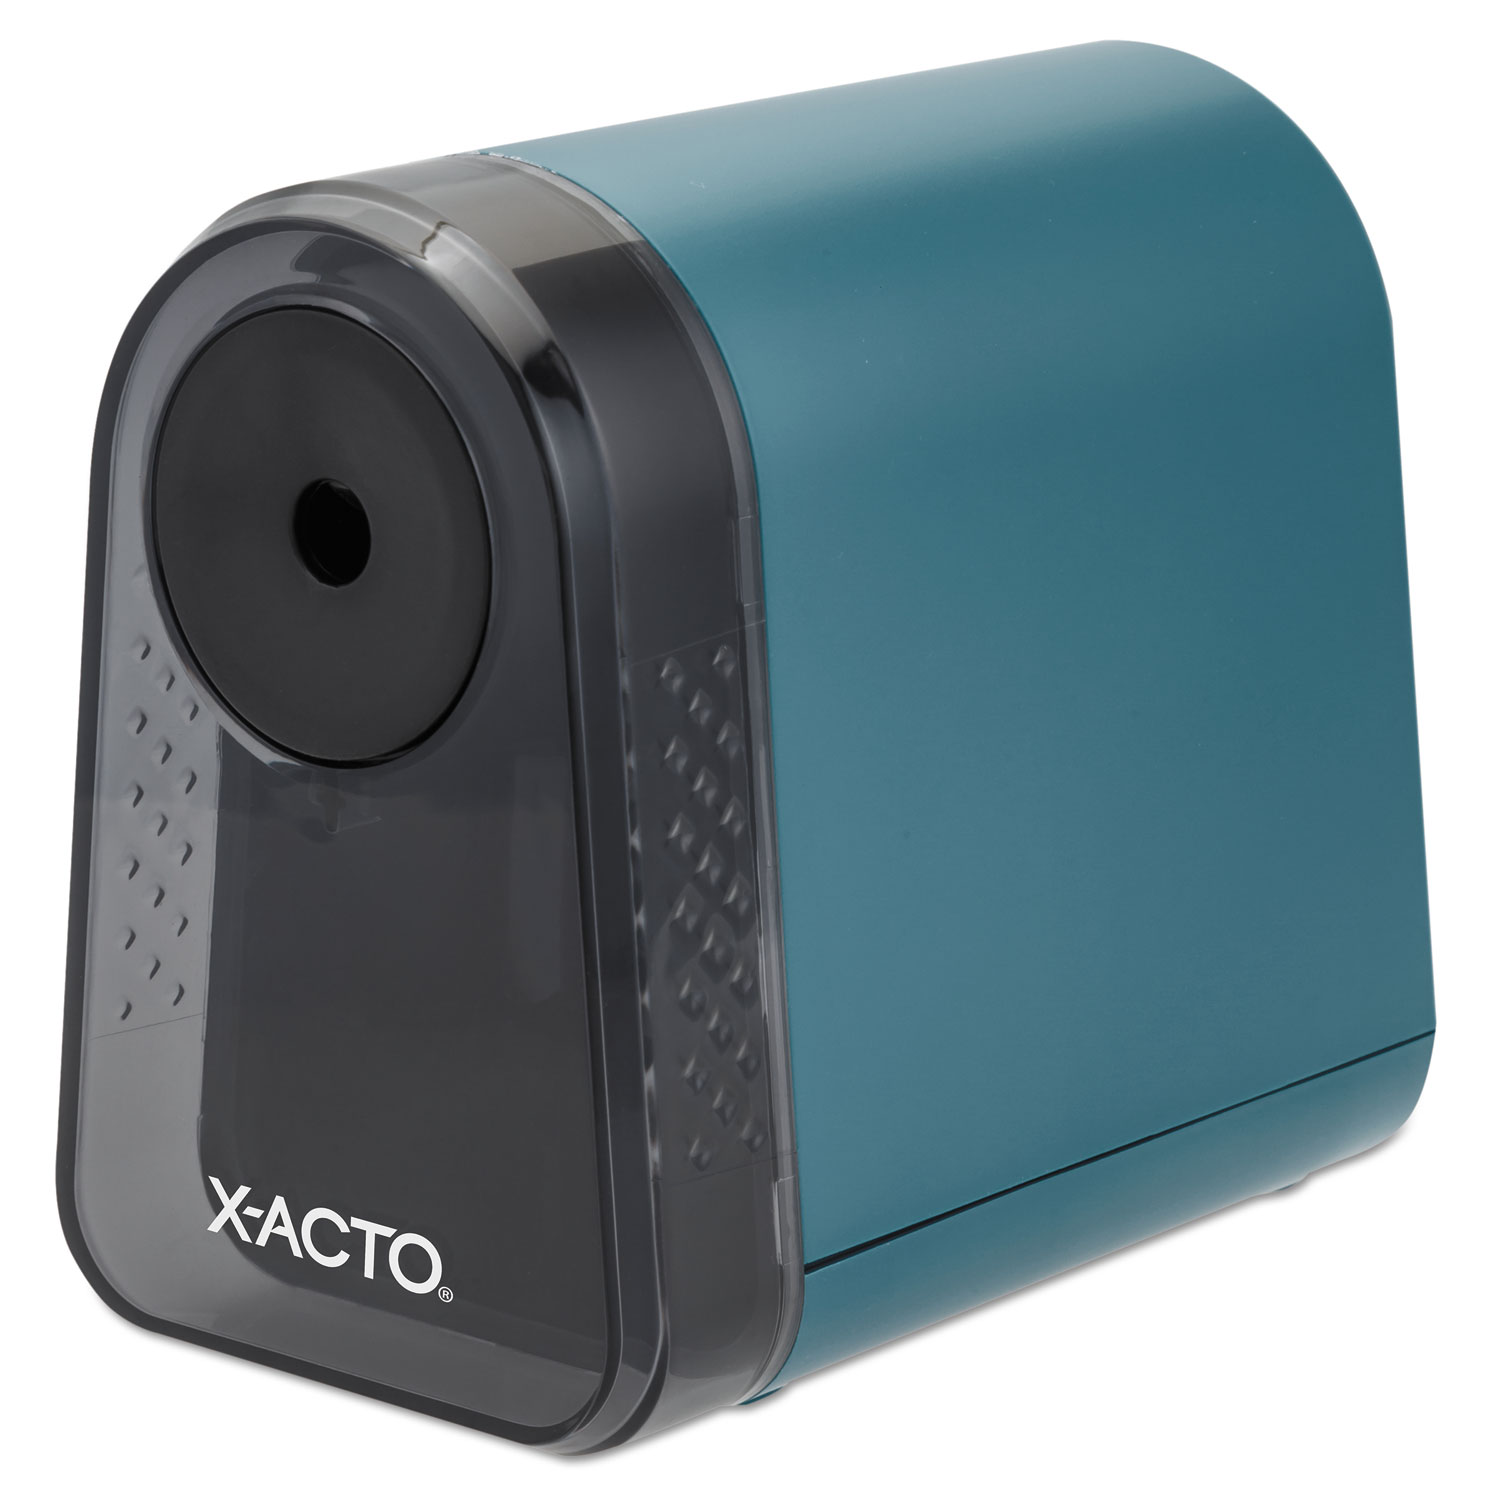 X-ACTO® Model 19501 Mighty Mite Home Office Electric Pencil Sharpener, AC-Powered, 3.5 x 5.5 x 4.5, Black/Gray/Smoke